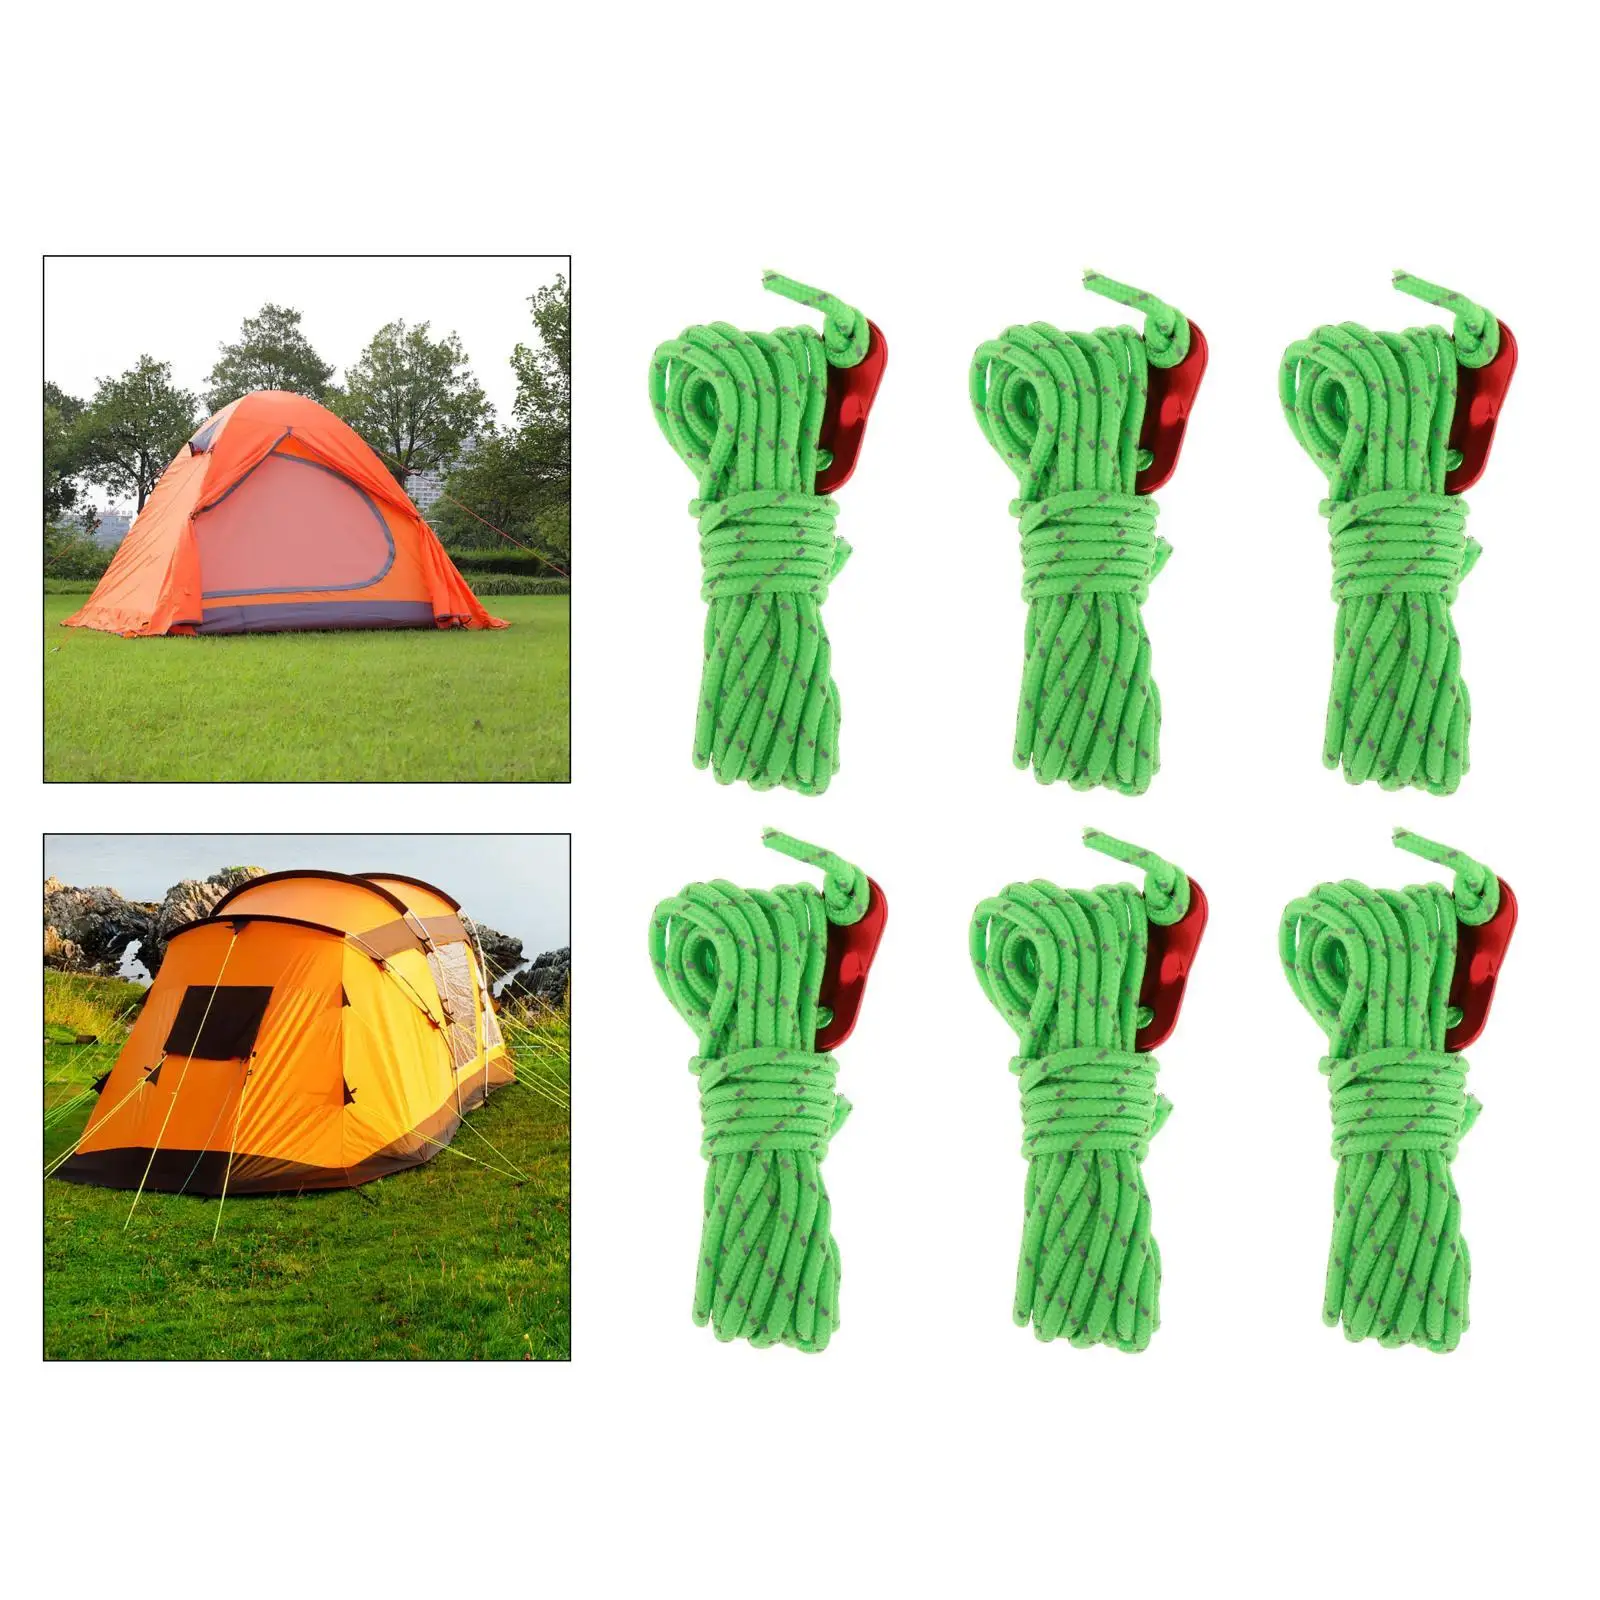 6x Tent Guy Rope Cord Visible Awning Paracord Outdoor Backpacking Gear